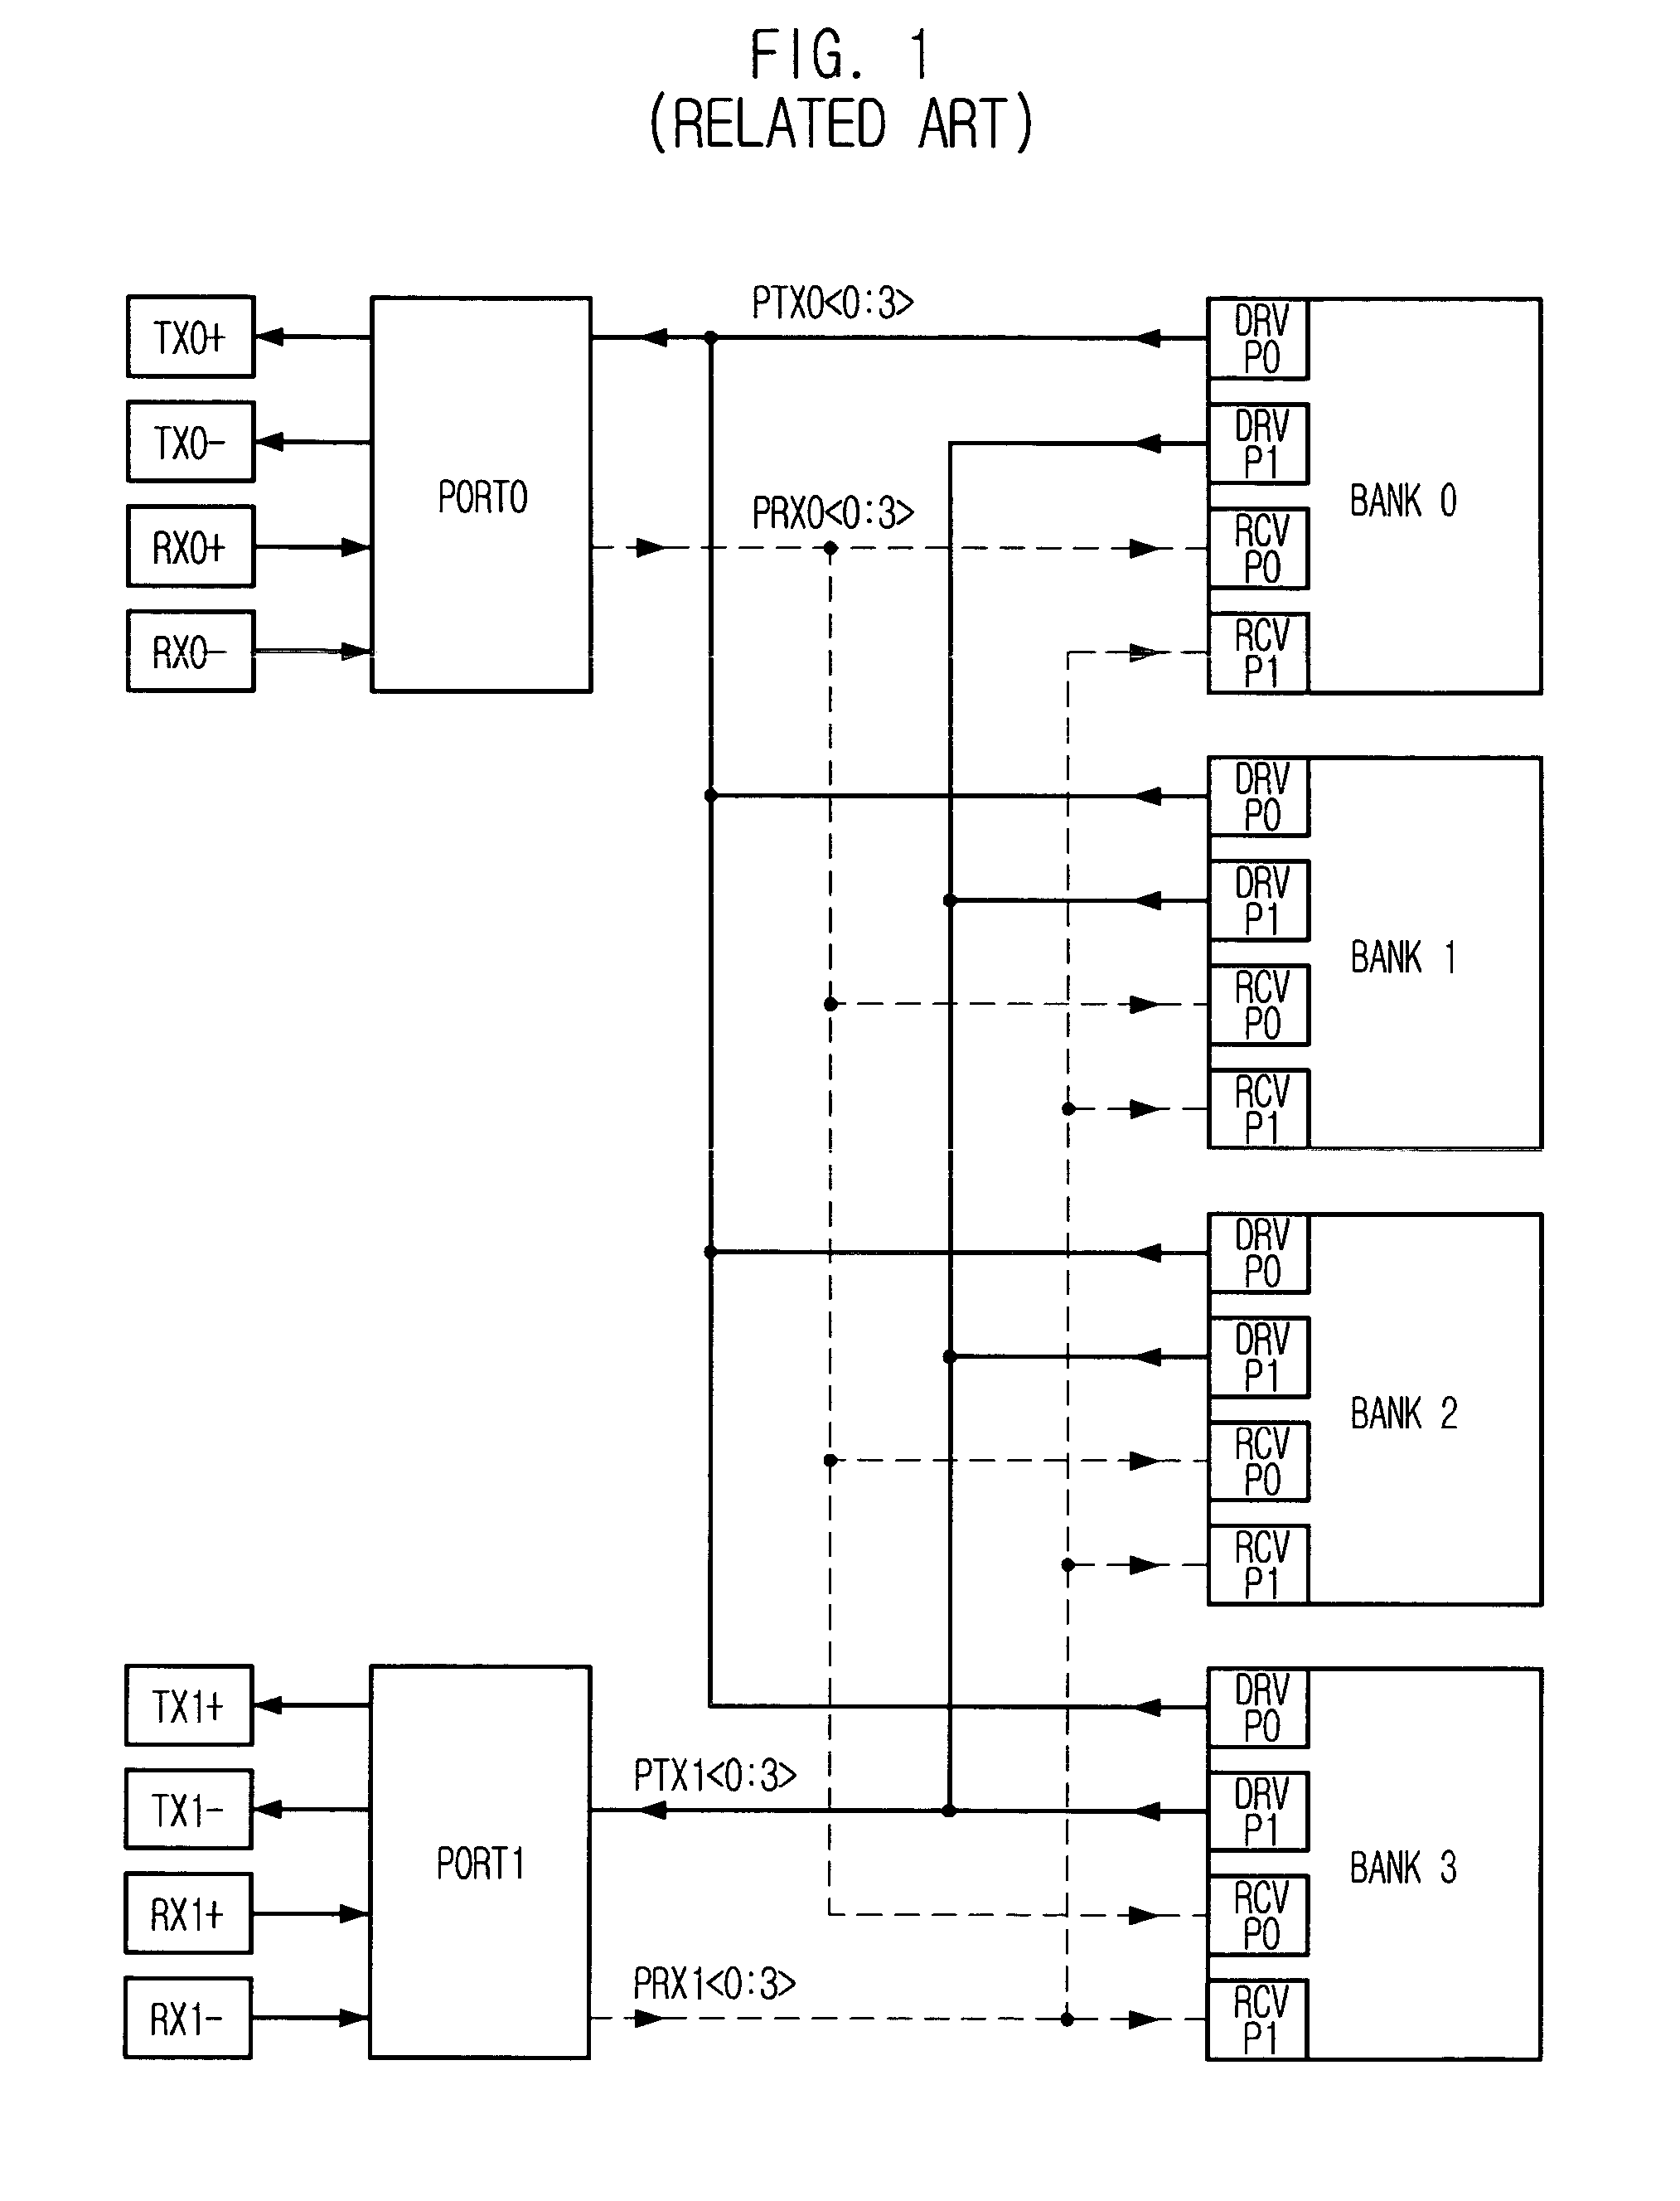 Multi-port memory device with serial input/output interface